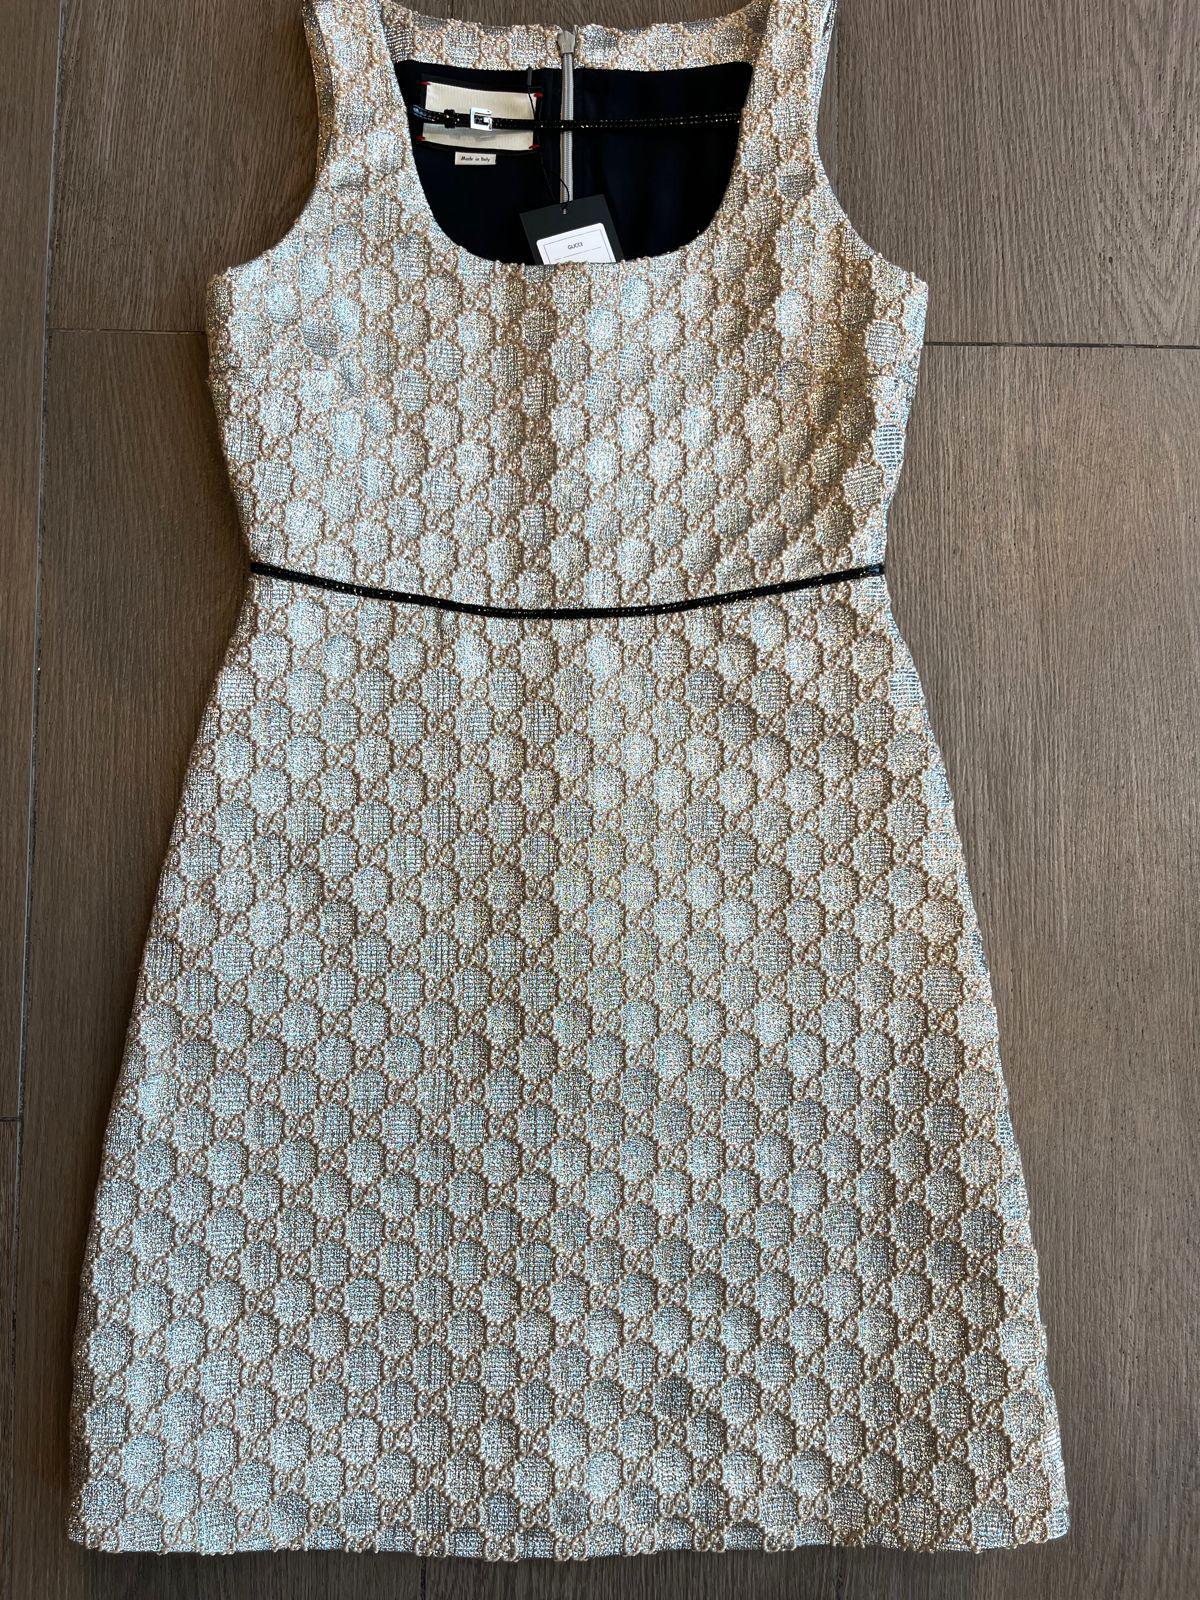 Women's or Men's Gucci 3, 5K$ GG Logo Brocade Dress with Straps For Sale